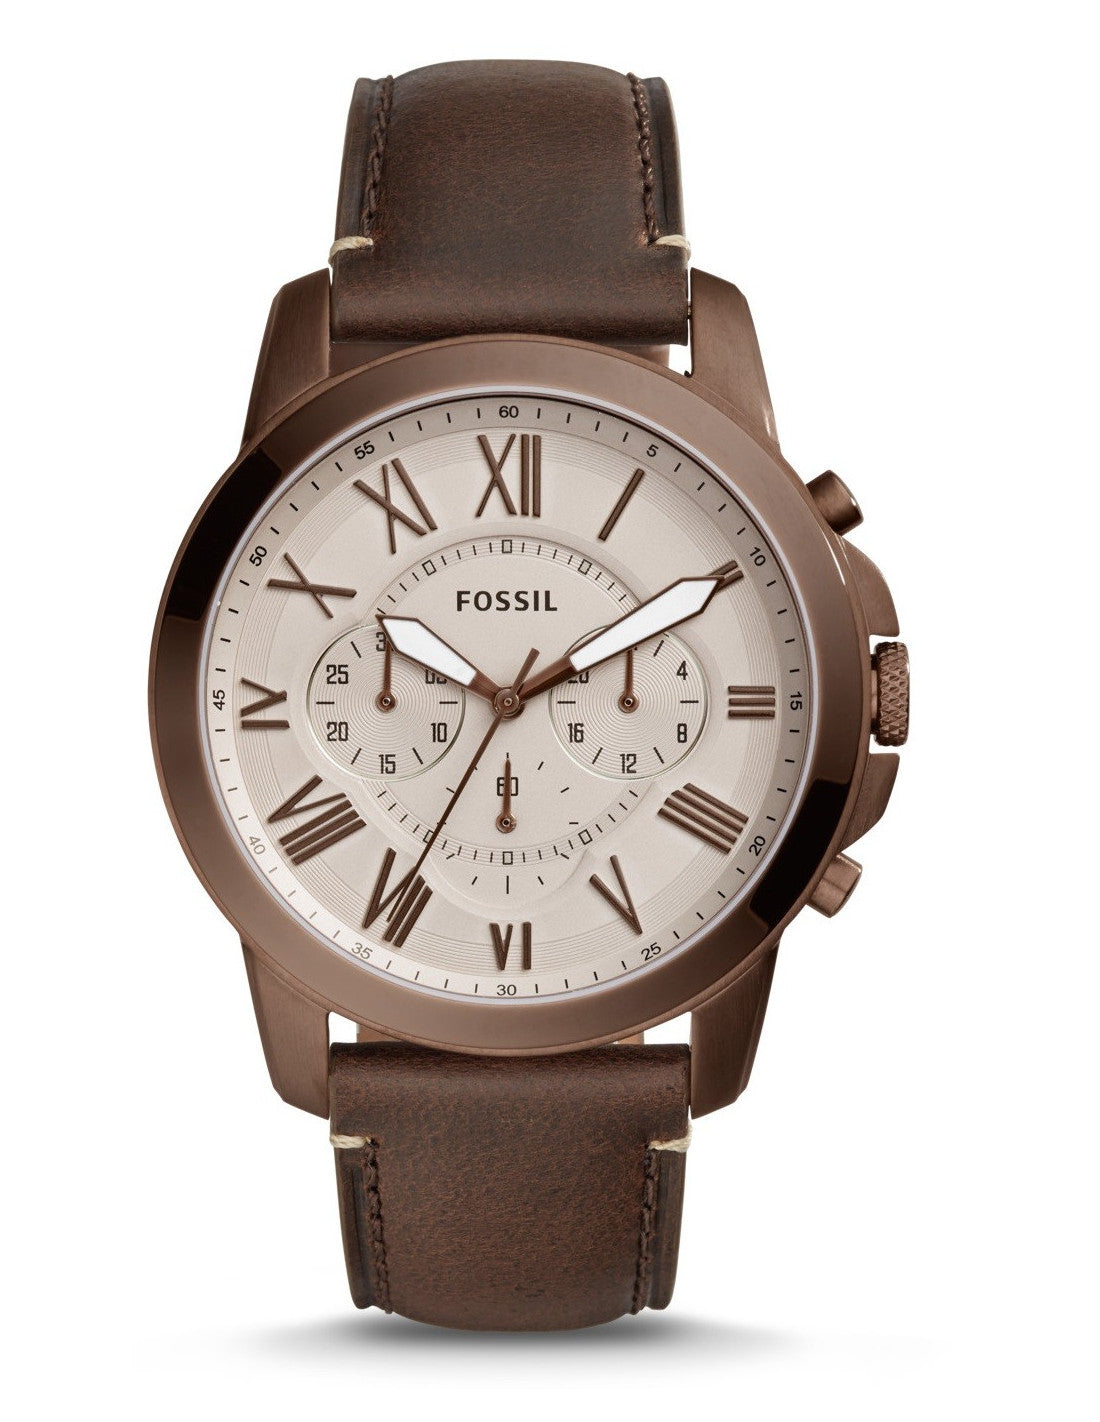 Fossil Men's Grant Stainless Steel Quartz Watch with Leather Calfskin Strap, Brown, 22 (Model: FS5344)